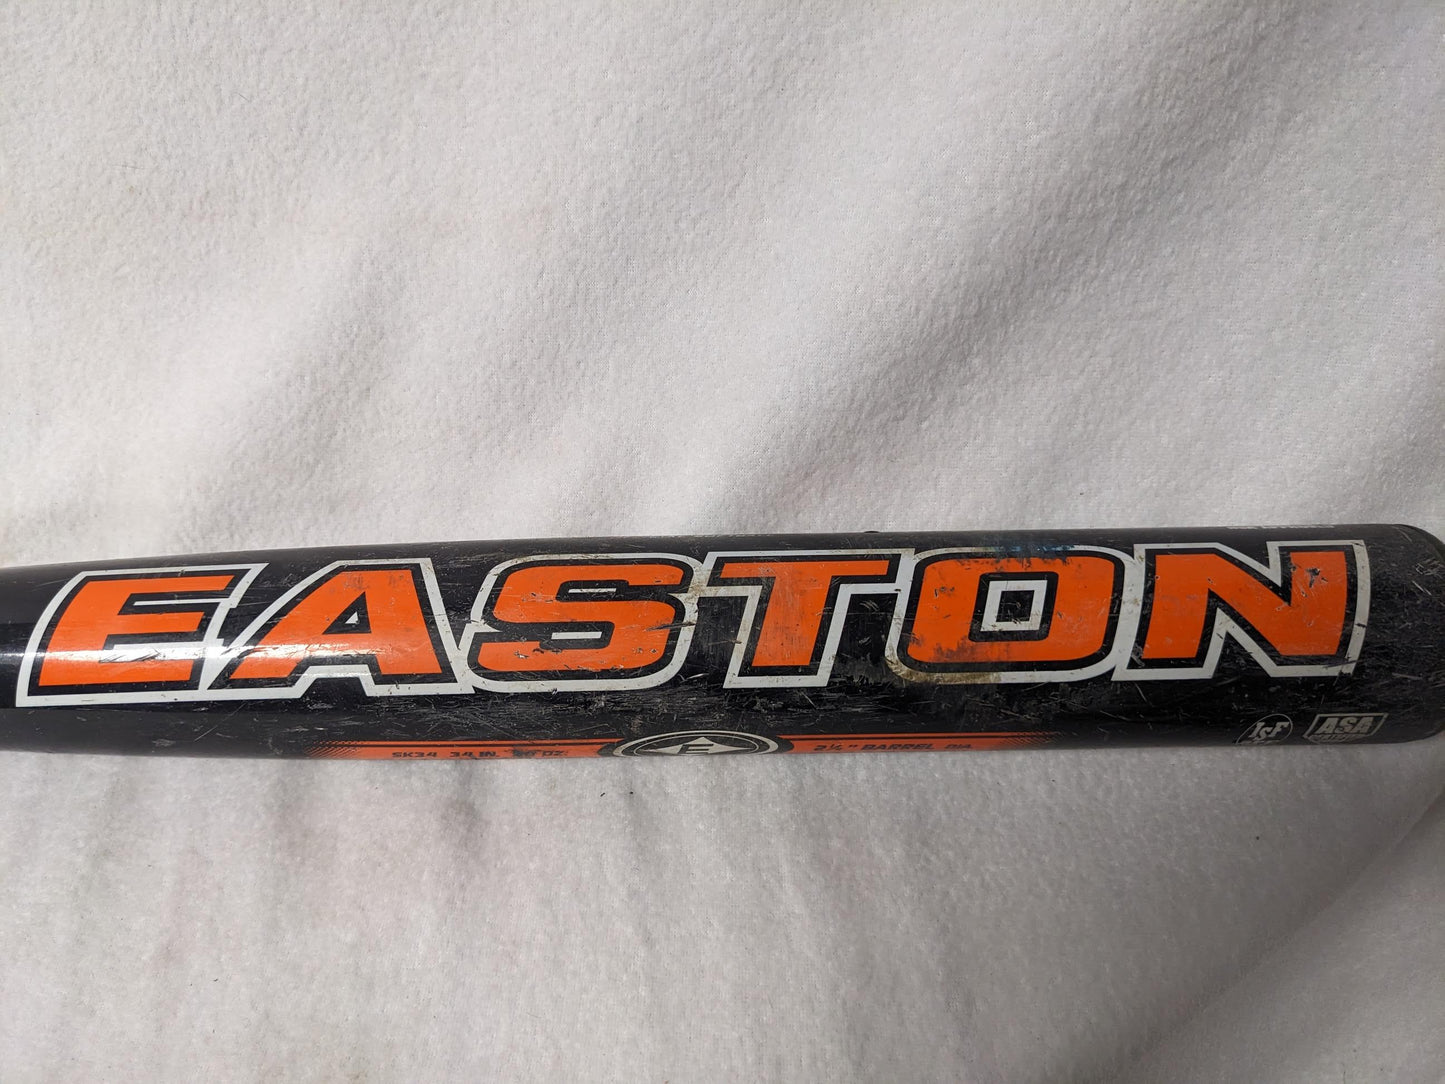 Easton Cyclone ASA Certified Official Softball Bat Size 34 In 30 Oz Orange Used USSSA